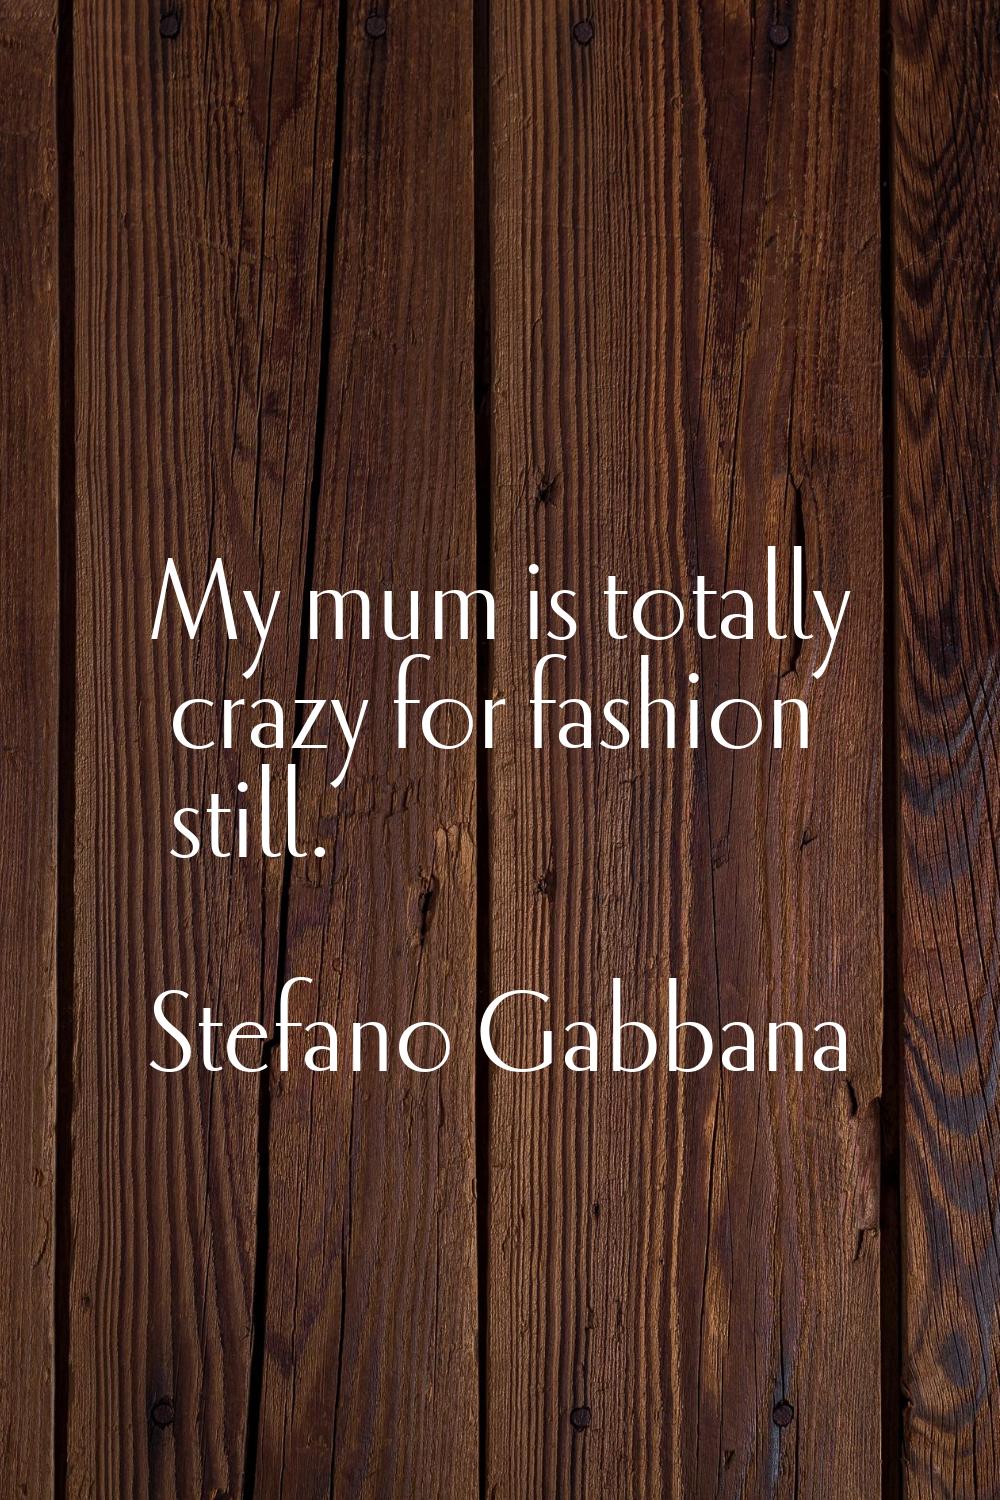 My mum is totally crazy for fashion still.